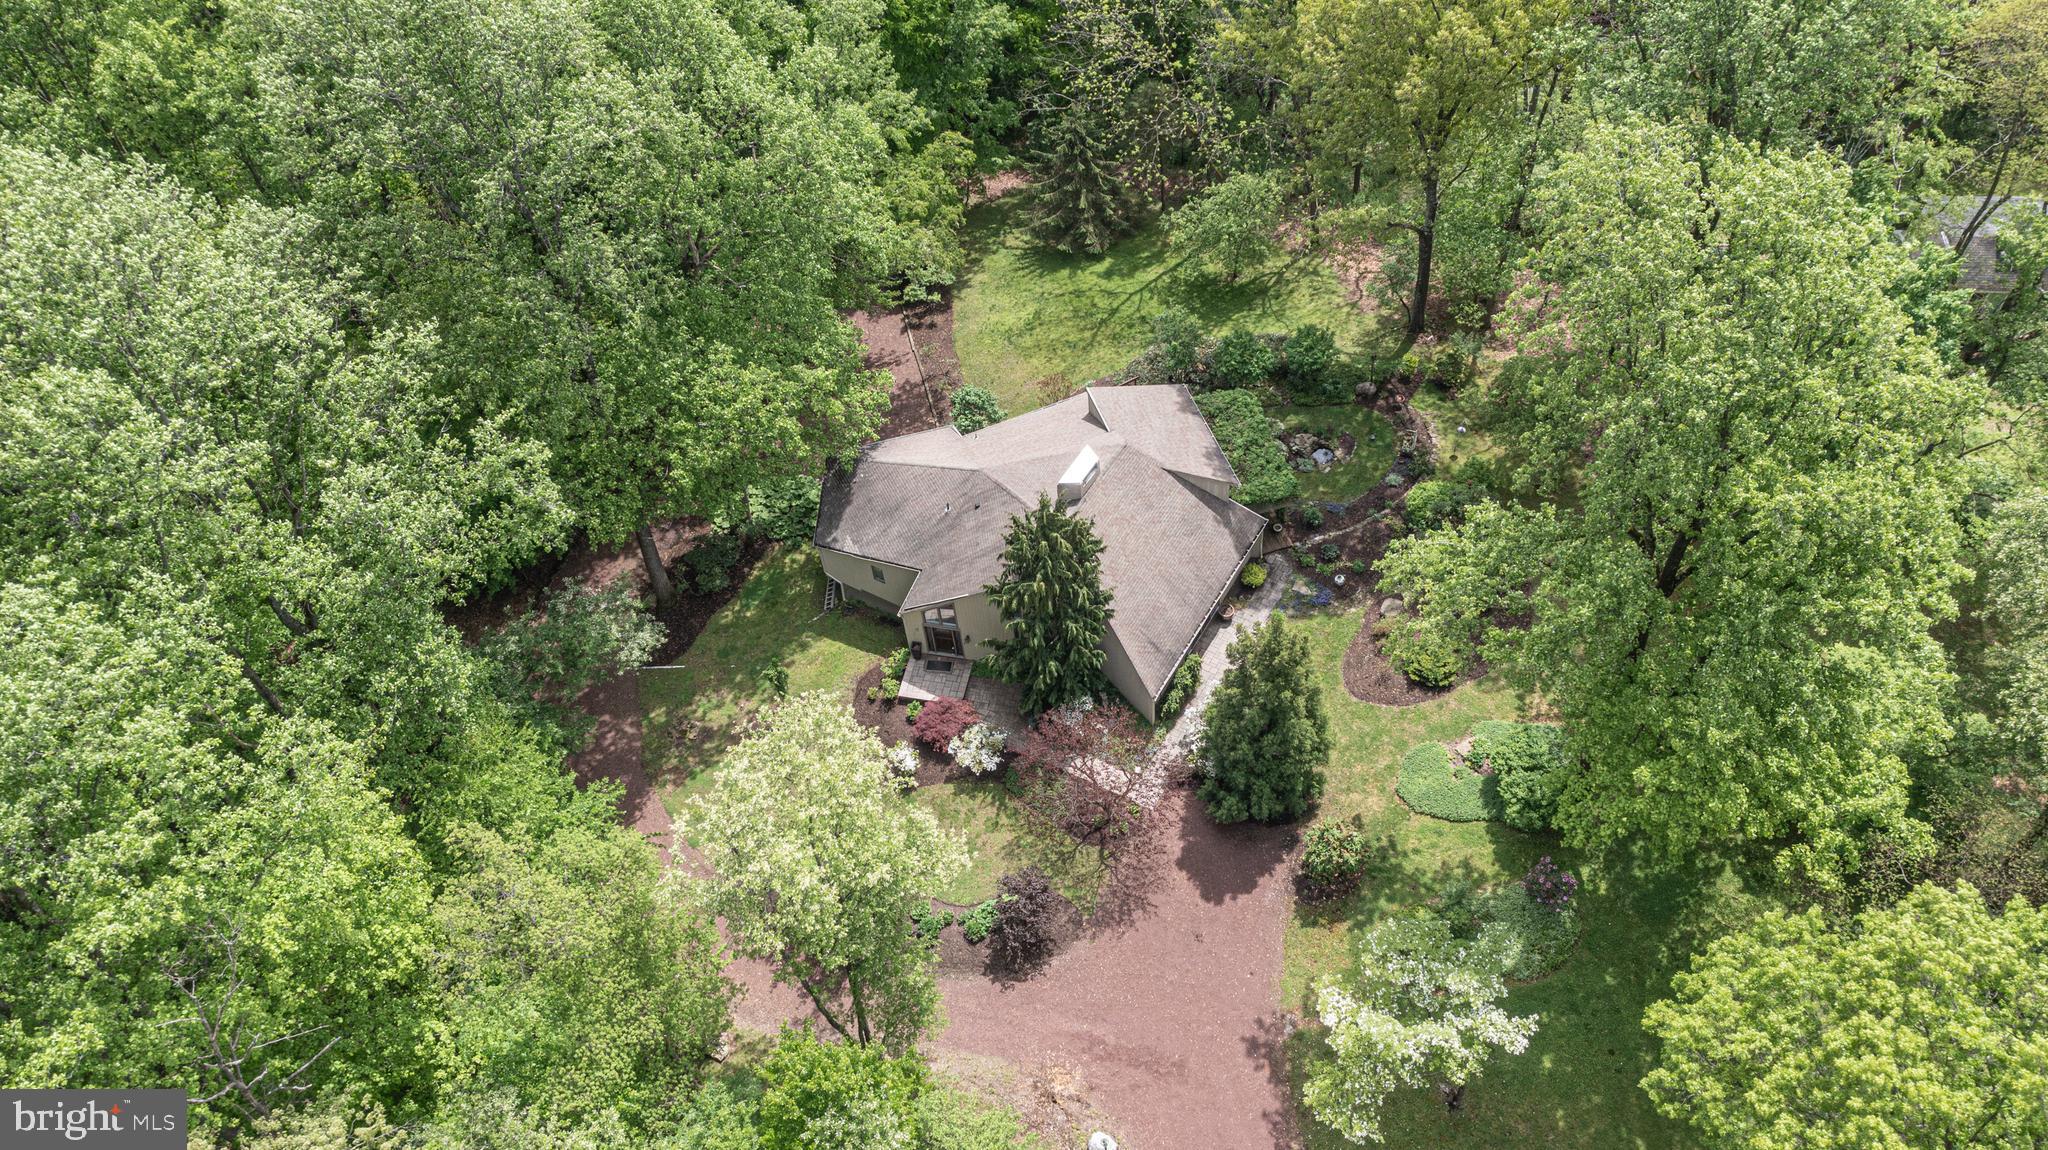 an aerial view of a house with a yard and covered with trees